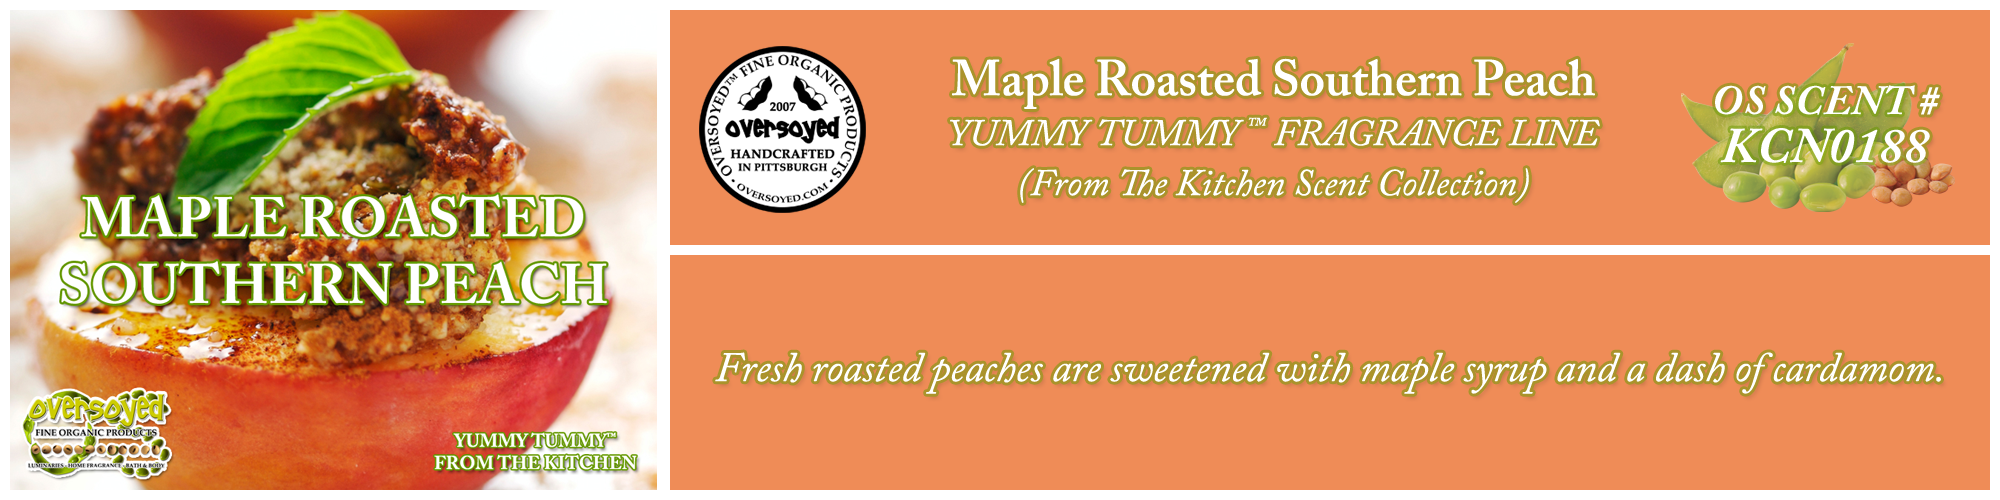 Maple Roasted Southern Peach Handcrafted Products Collection